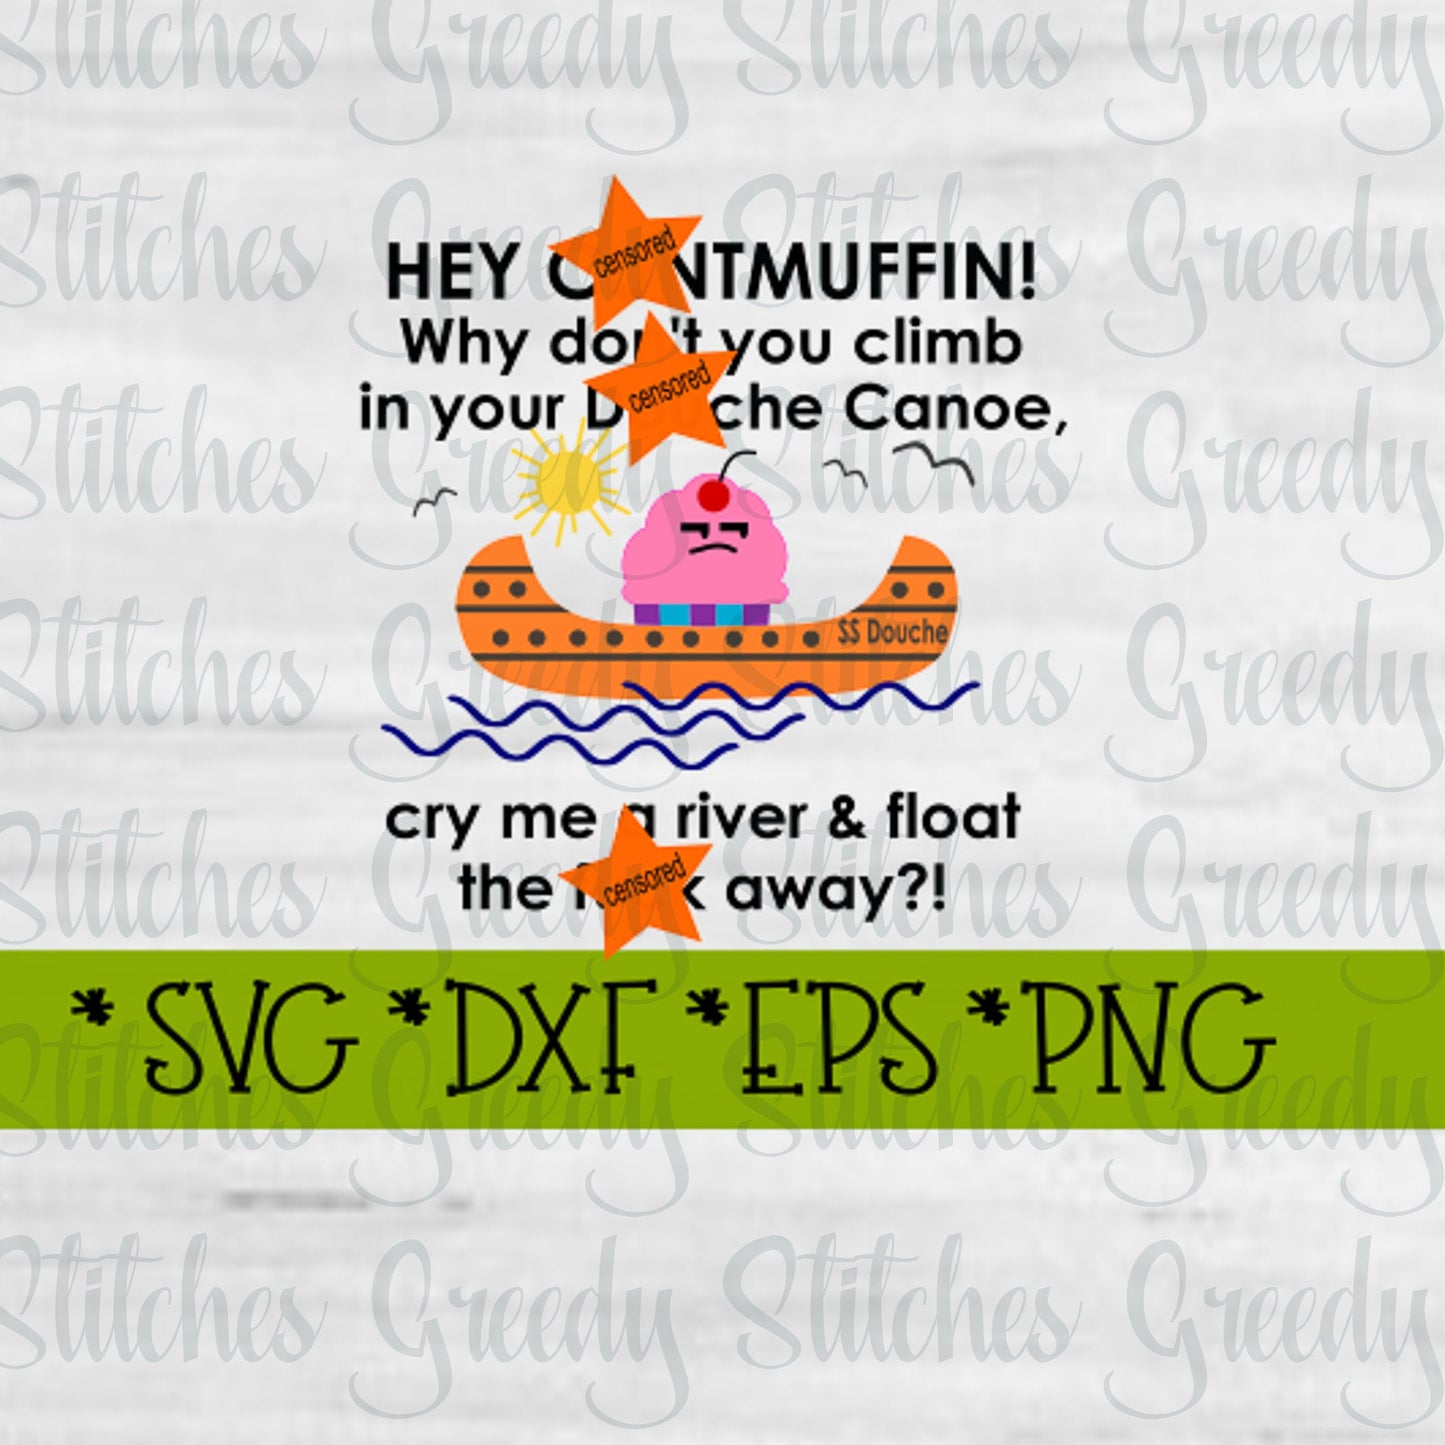 Hey C@ntmuffin! SvG, DxF, EpS, PnG, JpG.  Douche Canoe SVG | Cuntmuffin SvG | Cry A River SvG | F&ck Off SvG | Instant Download Cut Files.